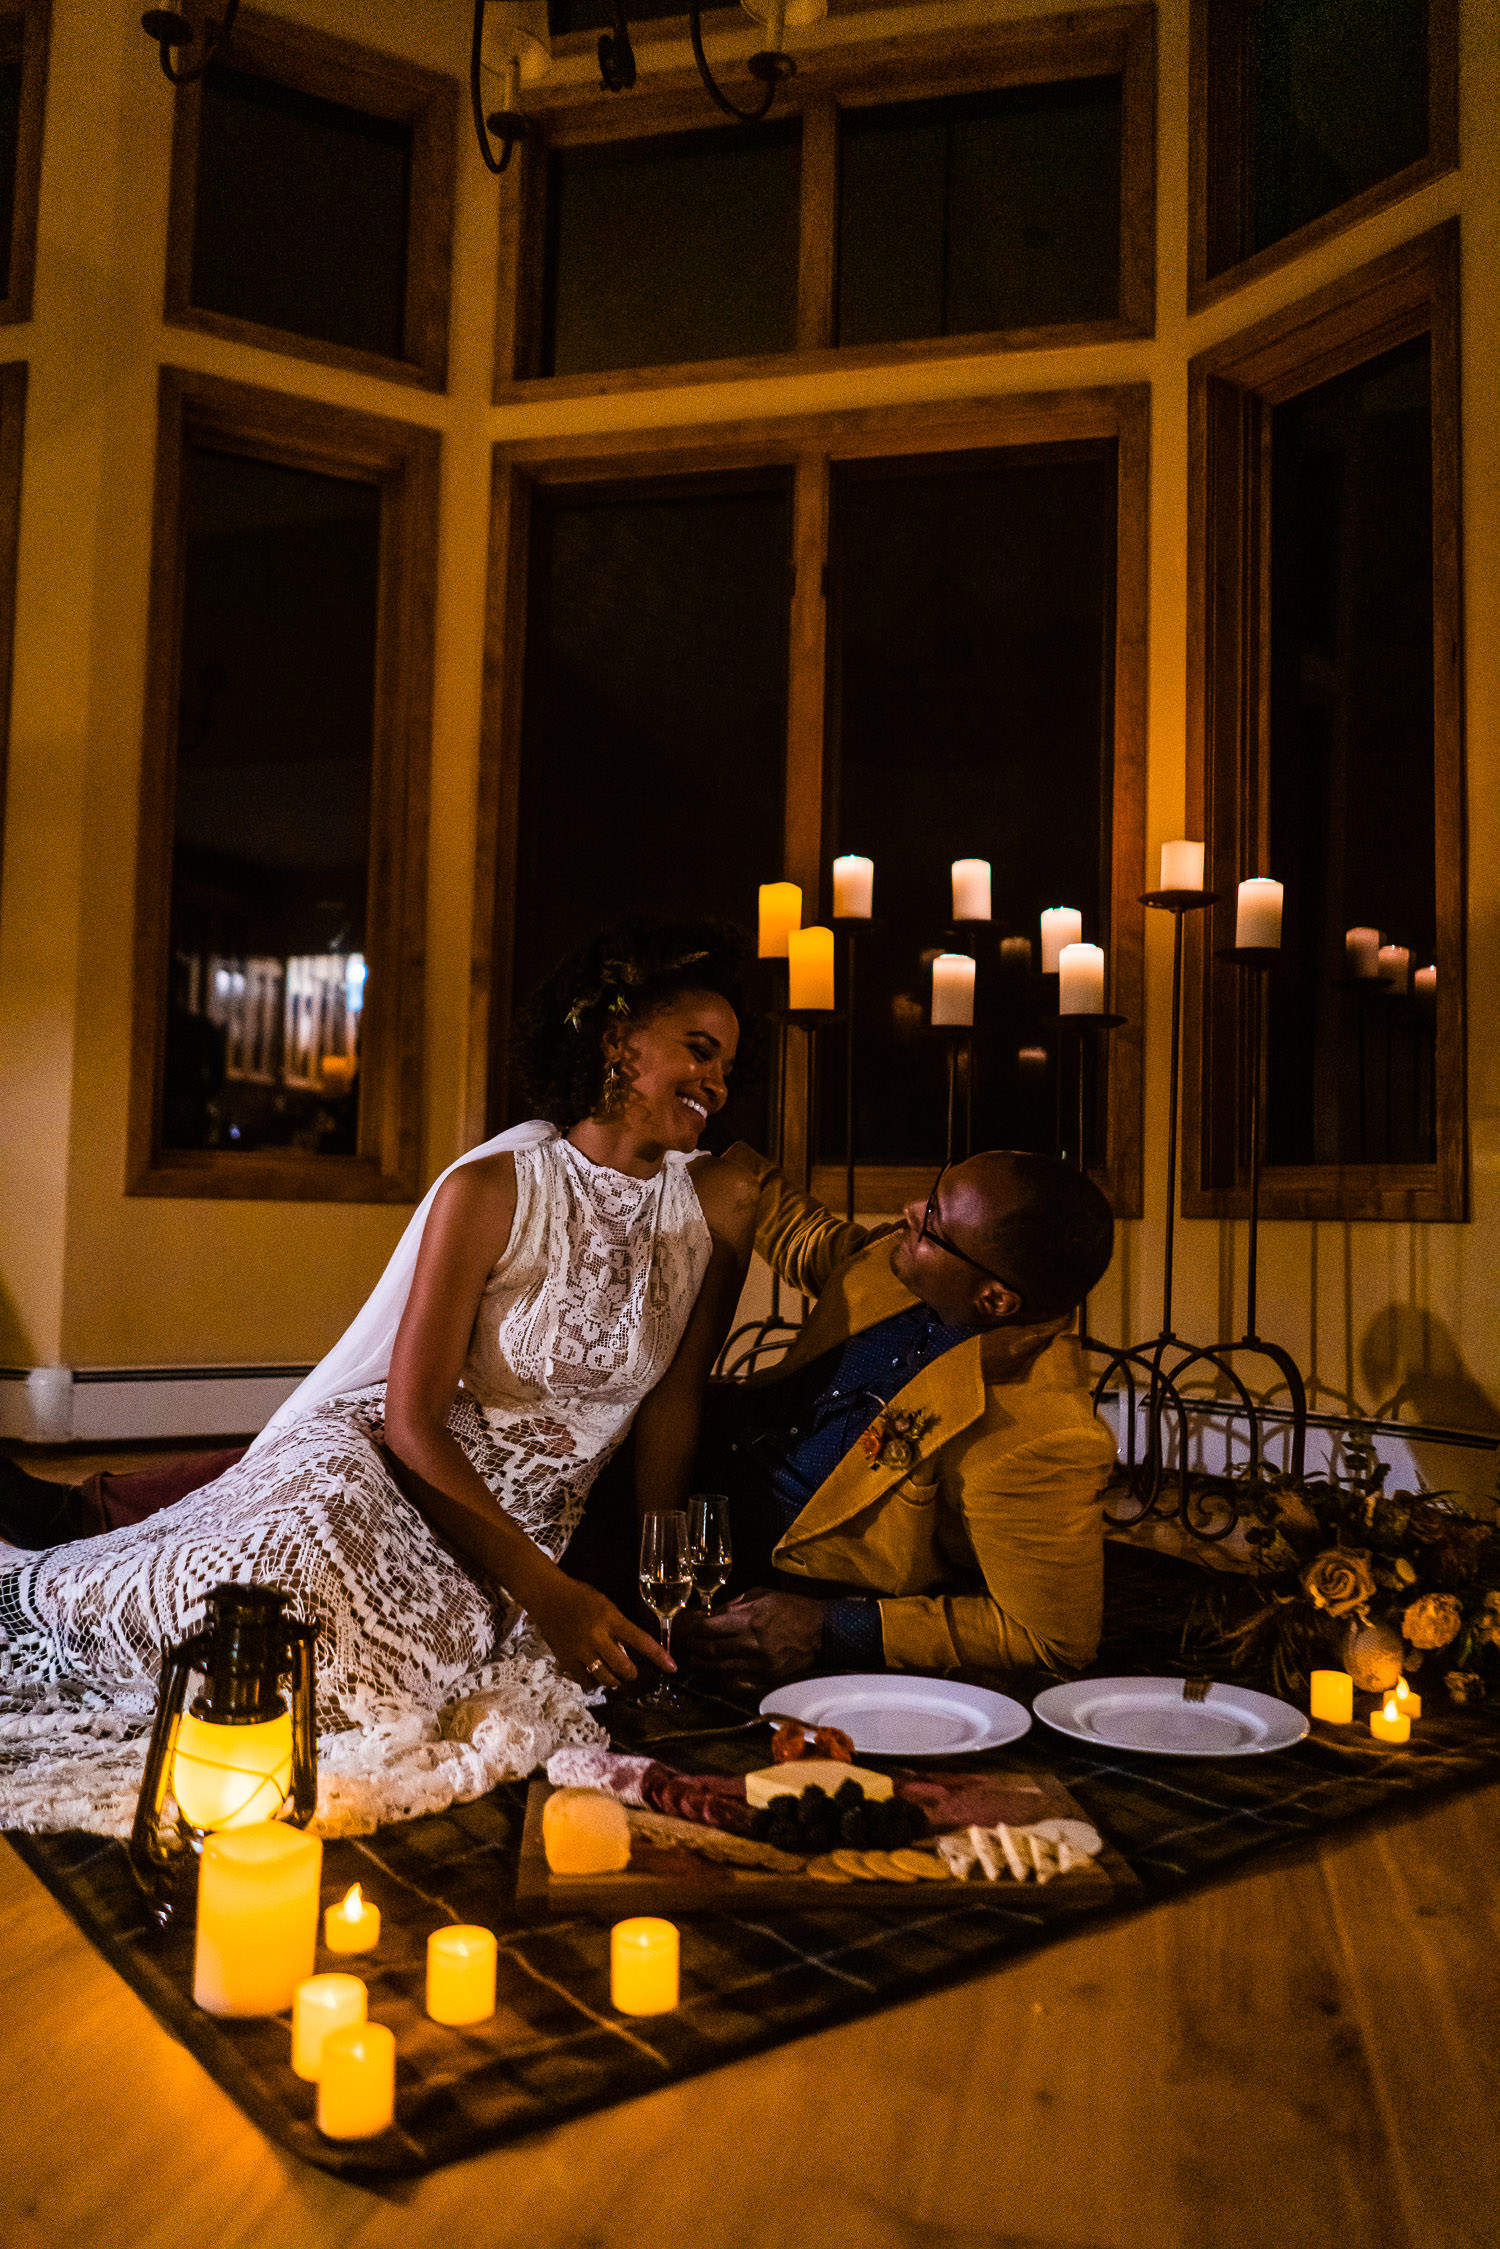 newlyweds share an embrace in a candlelit room